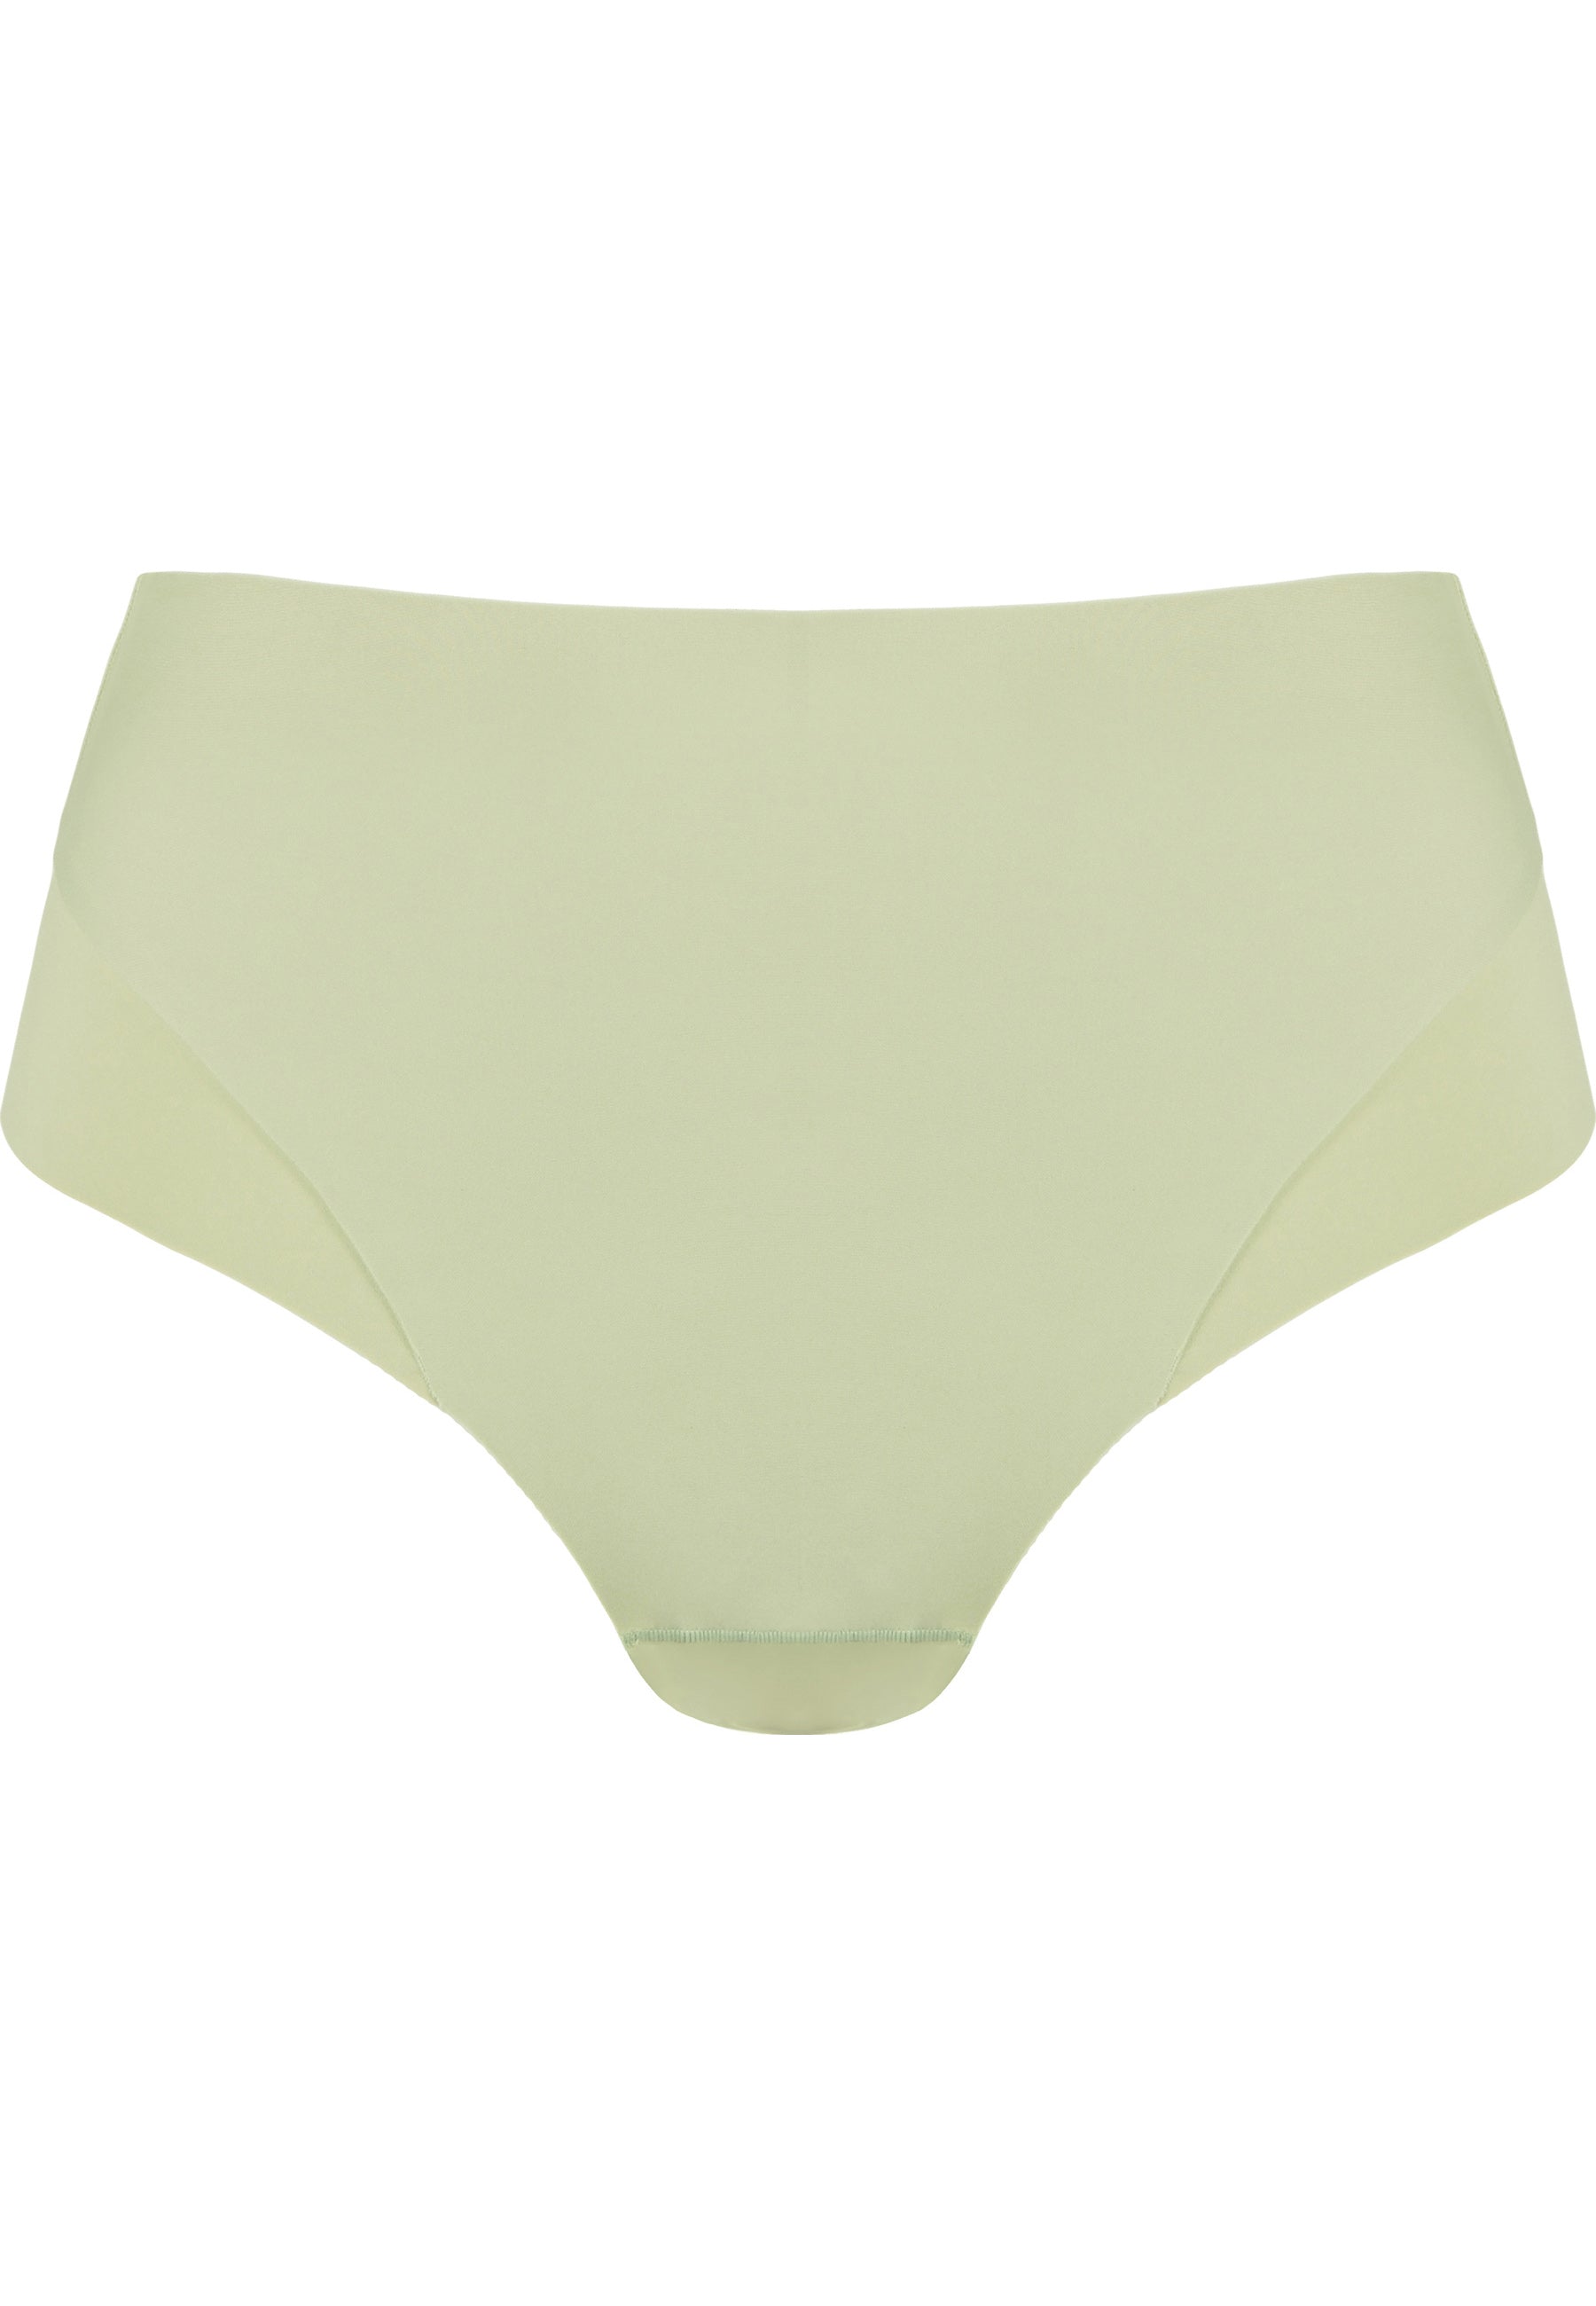 High Waist Brief with a Light Shaping Effect - Pale Greenshield